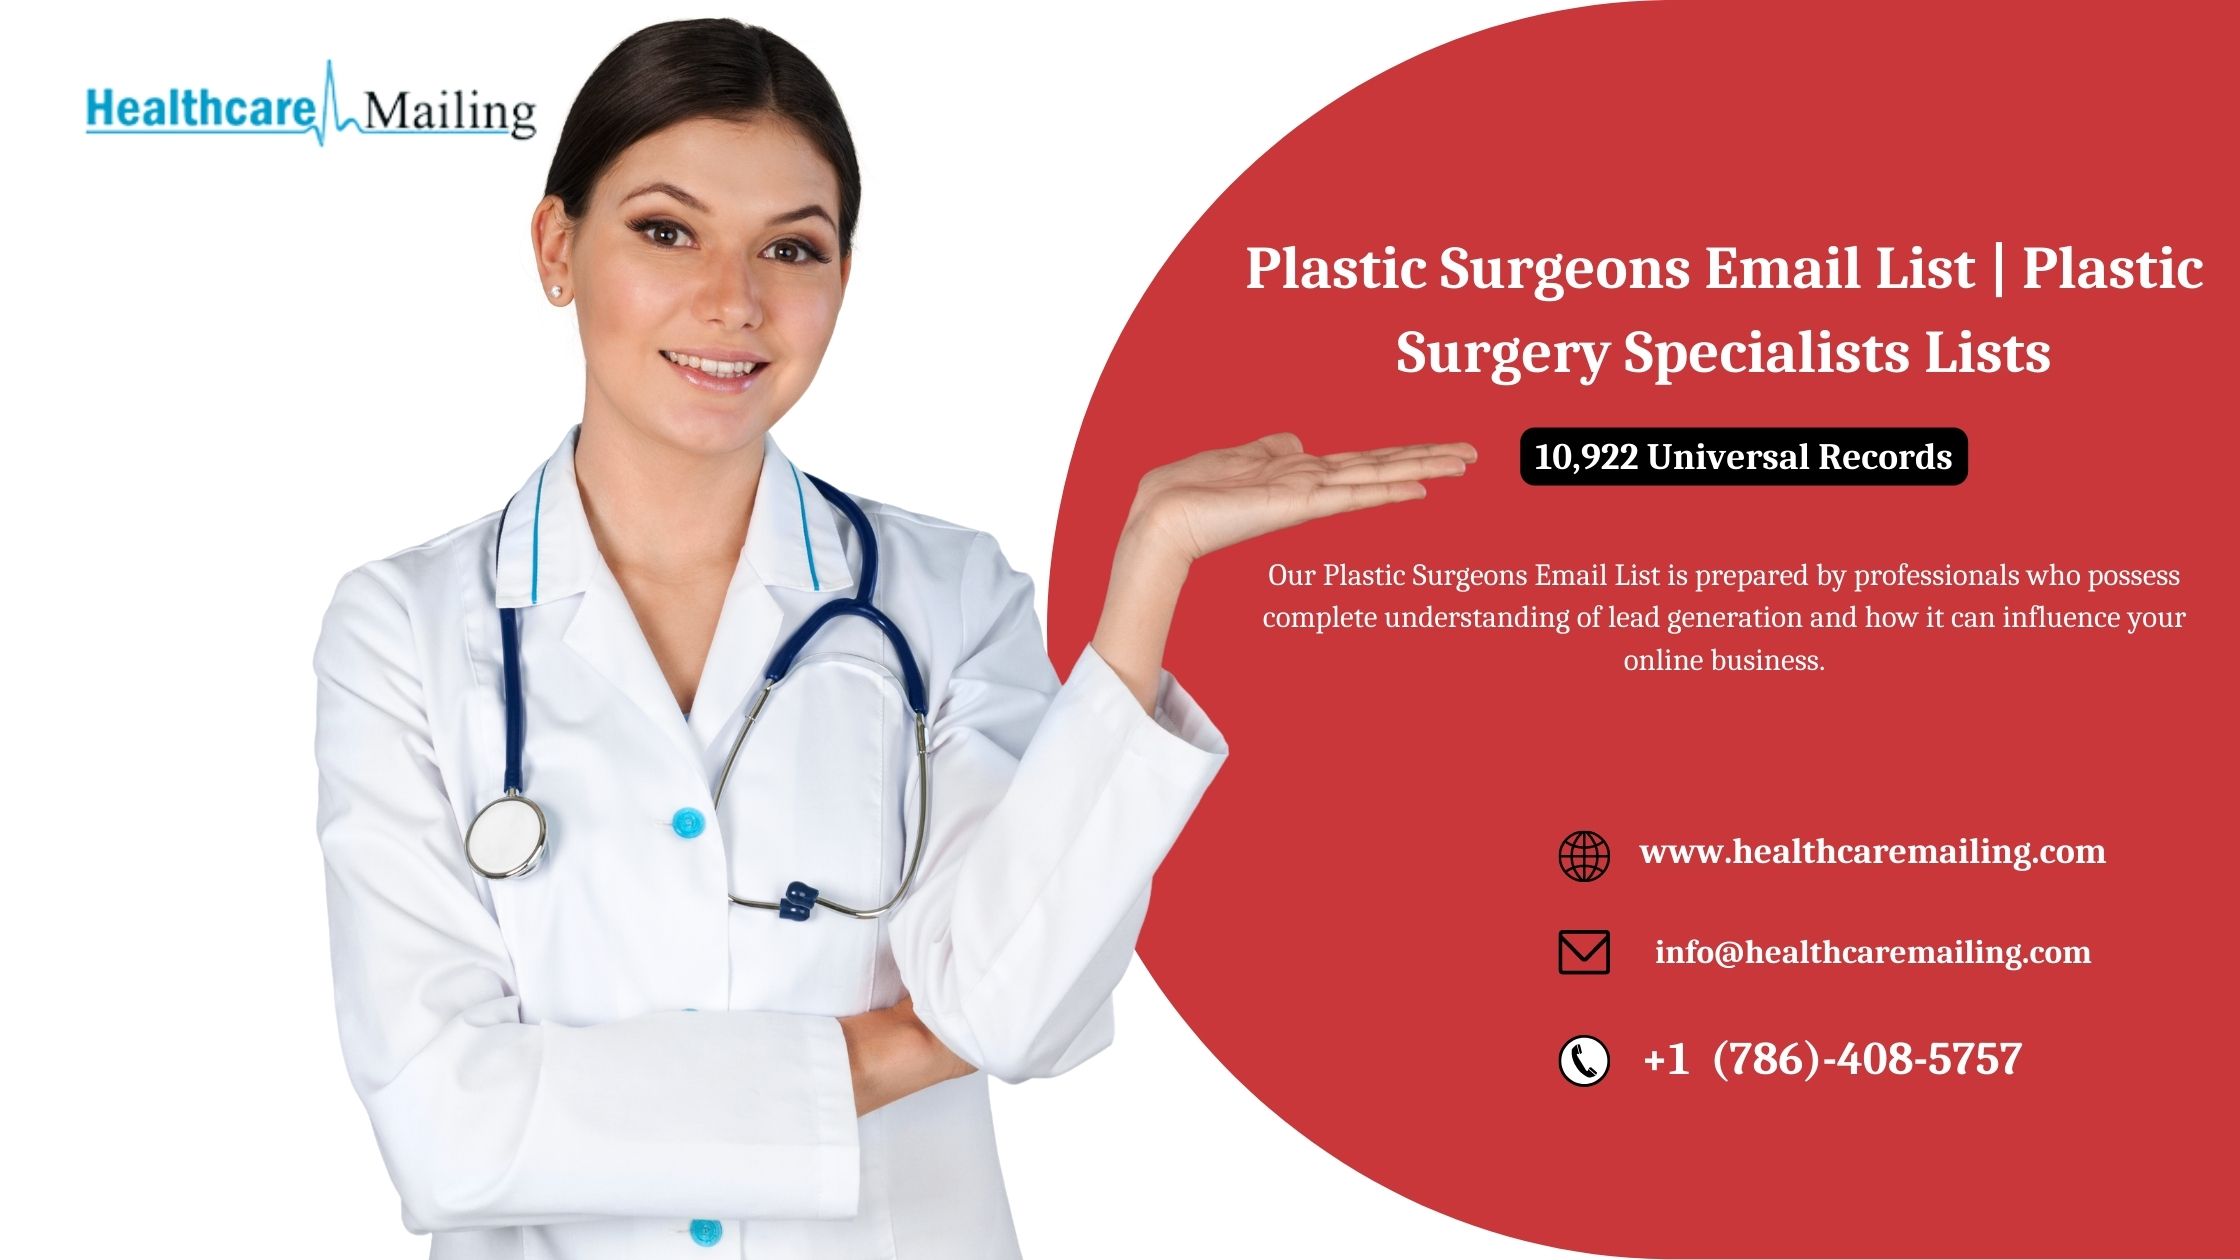 How can I use the plastic surgeons email list for a successful drip campaign?